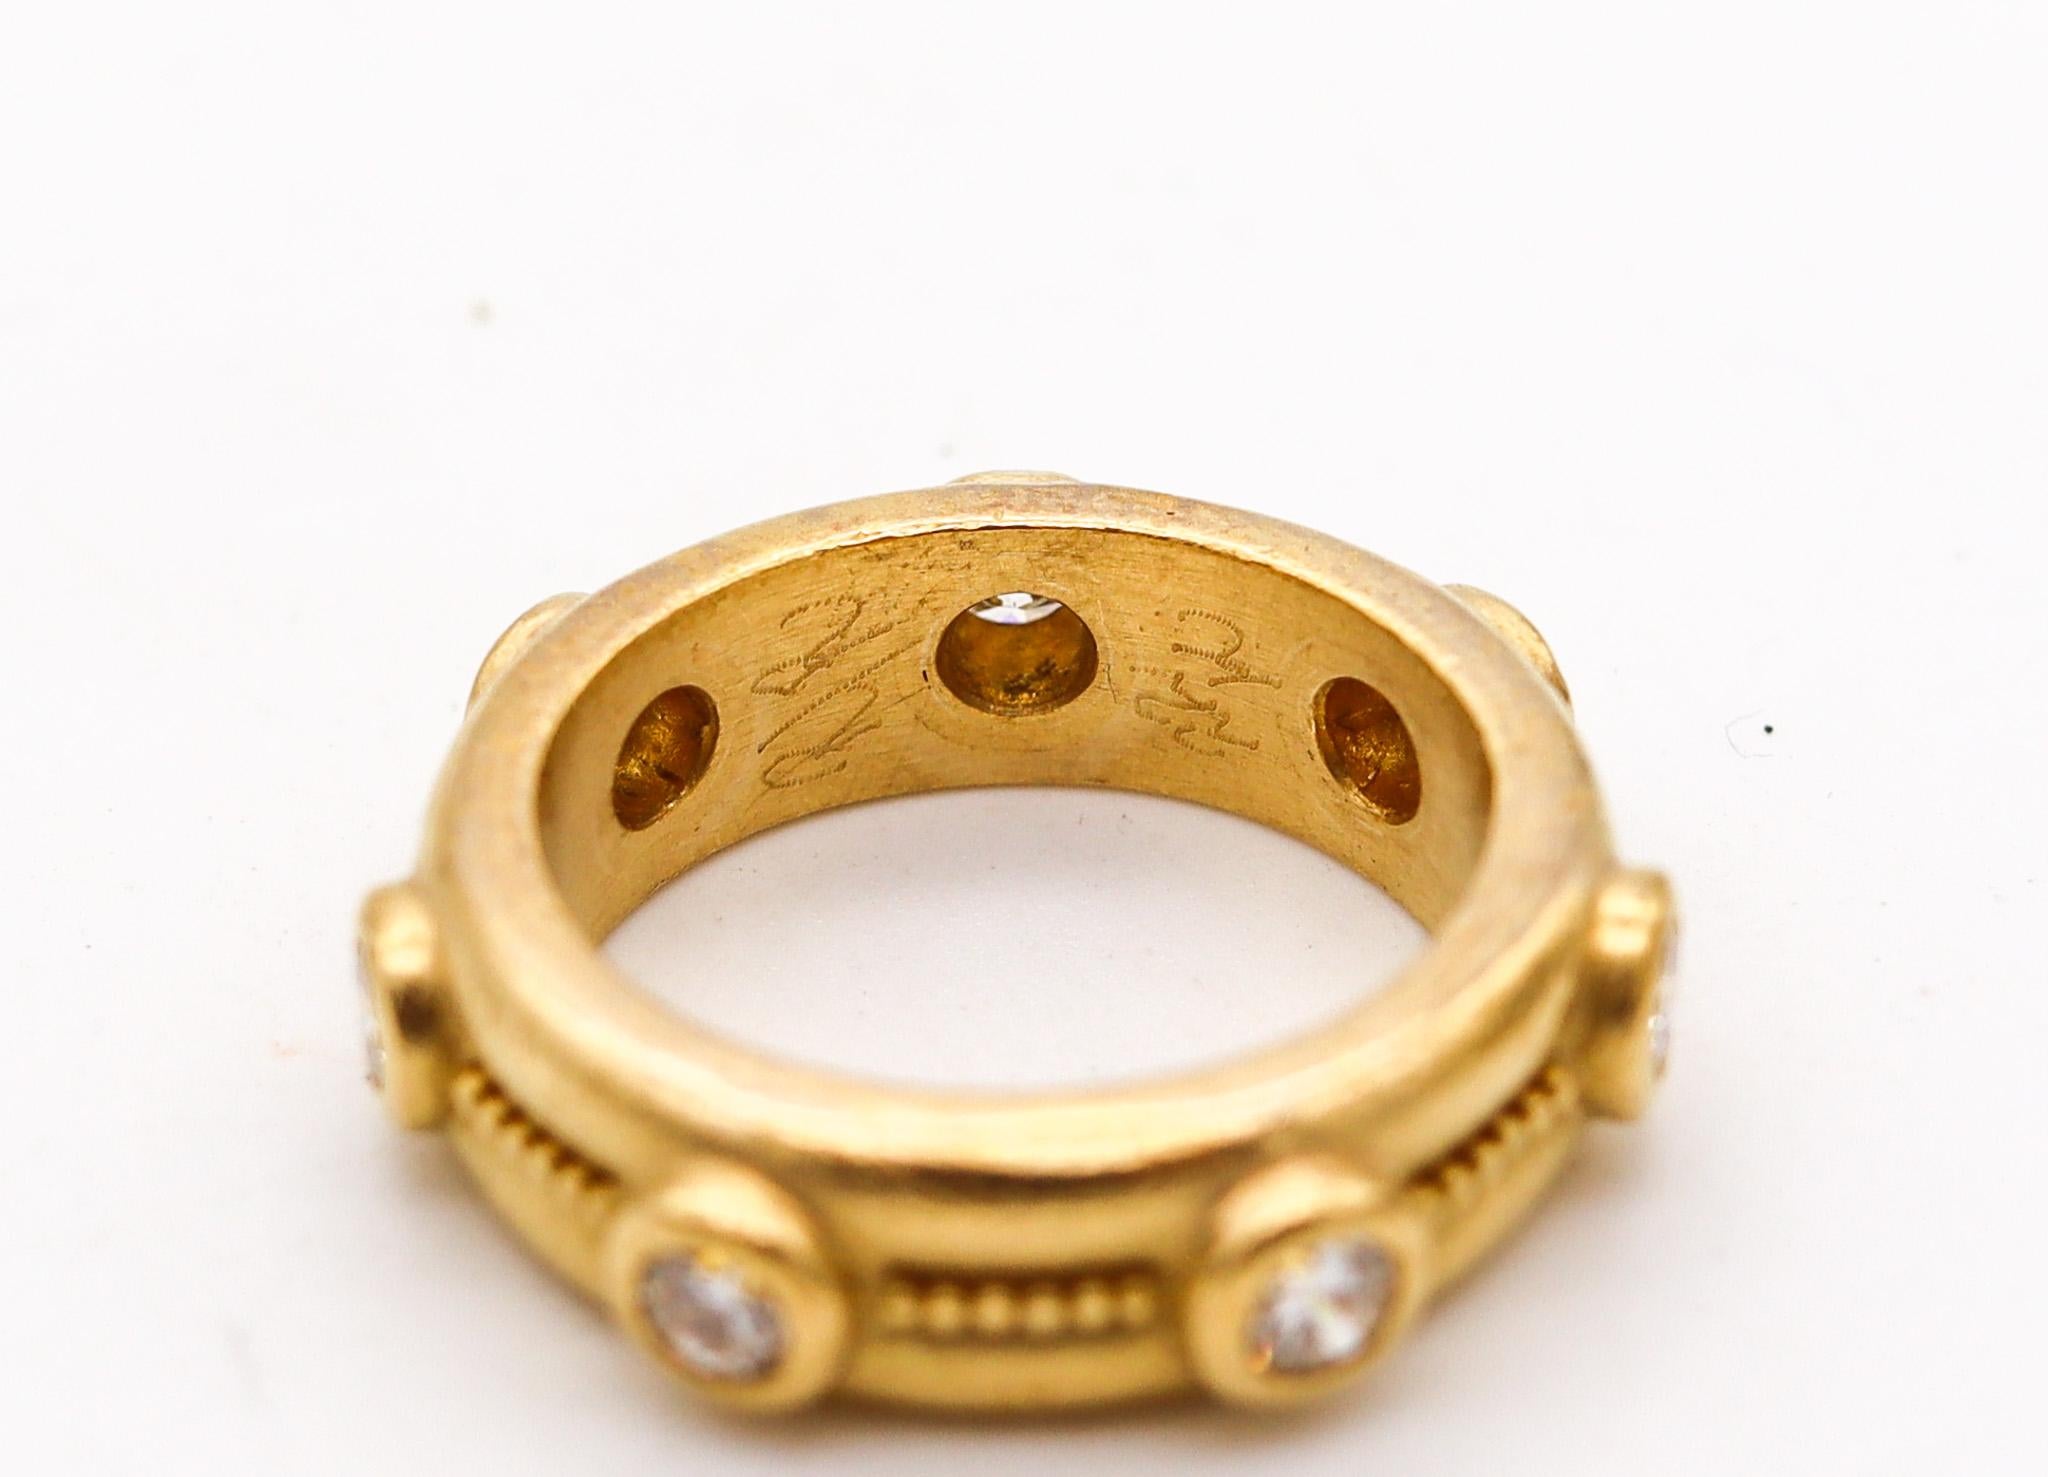 Brilliant Cut Reinstein Ross Eternity Ring In 22Kt Yellow Gold With 1.05 Ctw in Diamonds